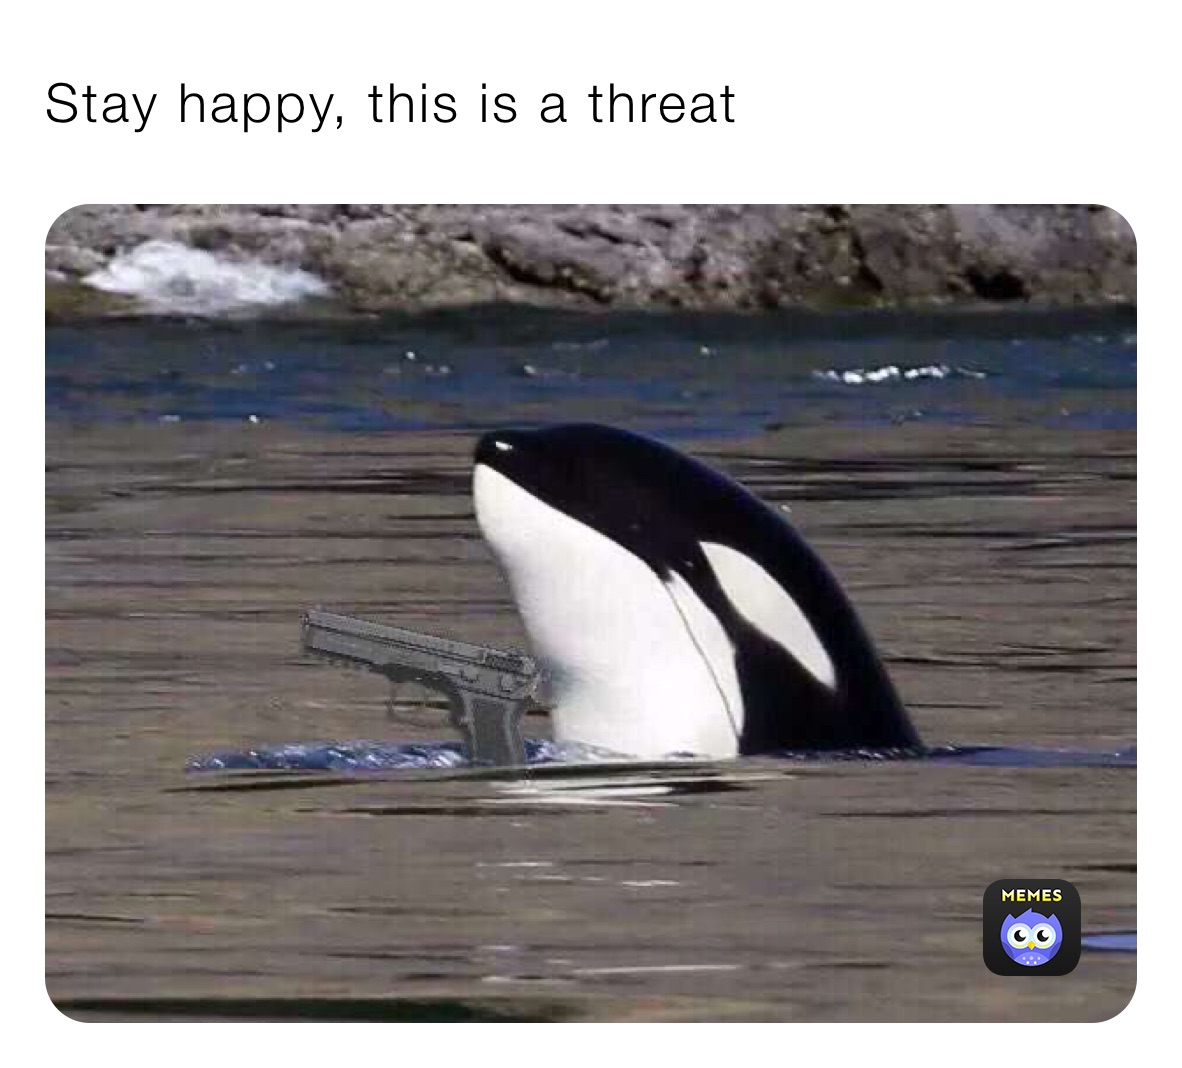 Stay happy, this is a threat